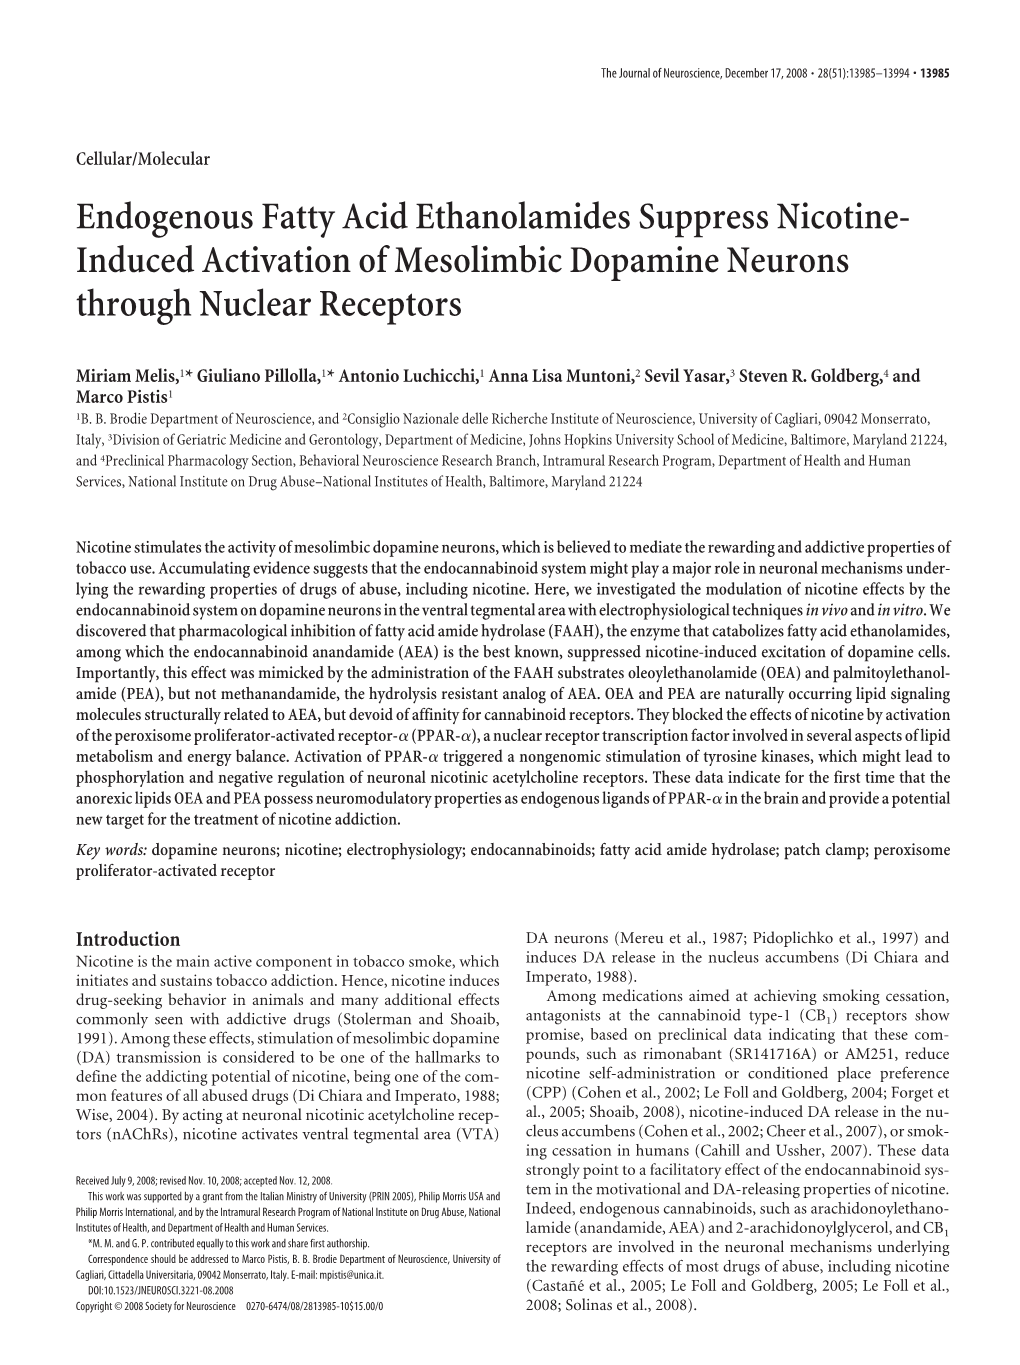 Endogenous Fatty Acid Ethanolamides Suppress Nicotine- Induced Activation of Mesolimbic Dopamine Neurons Through Nuclear Receptors